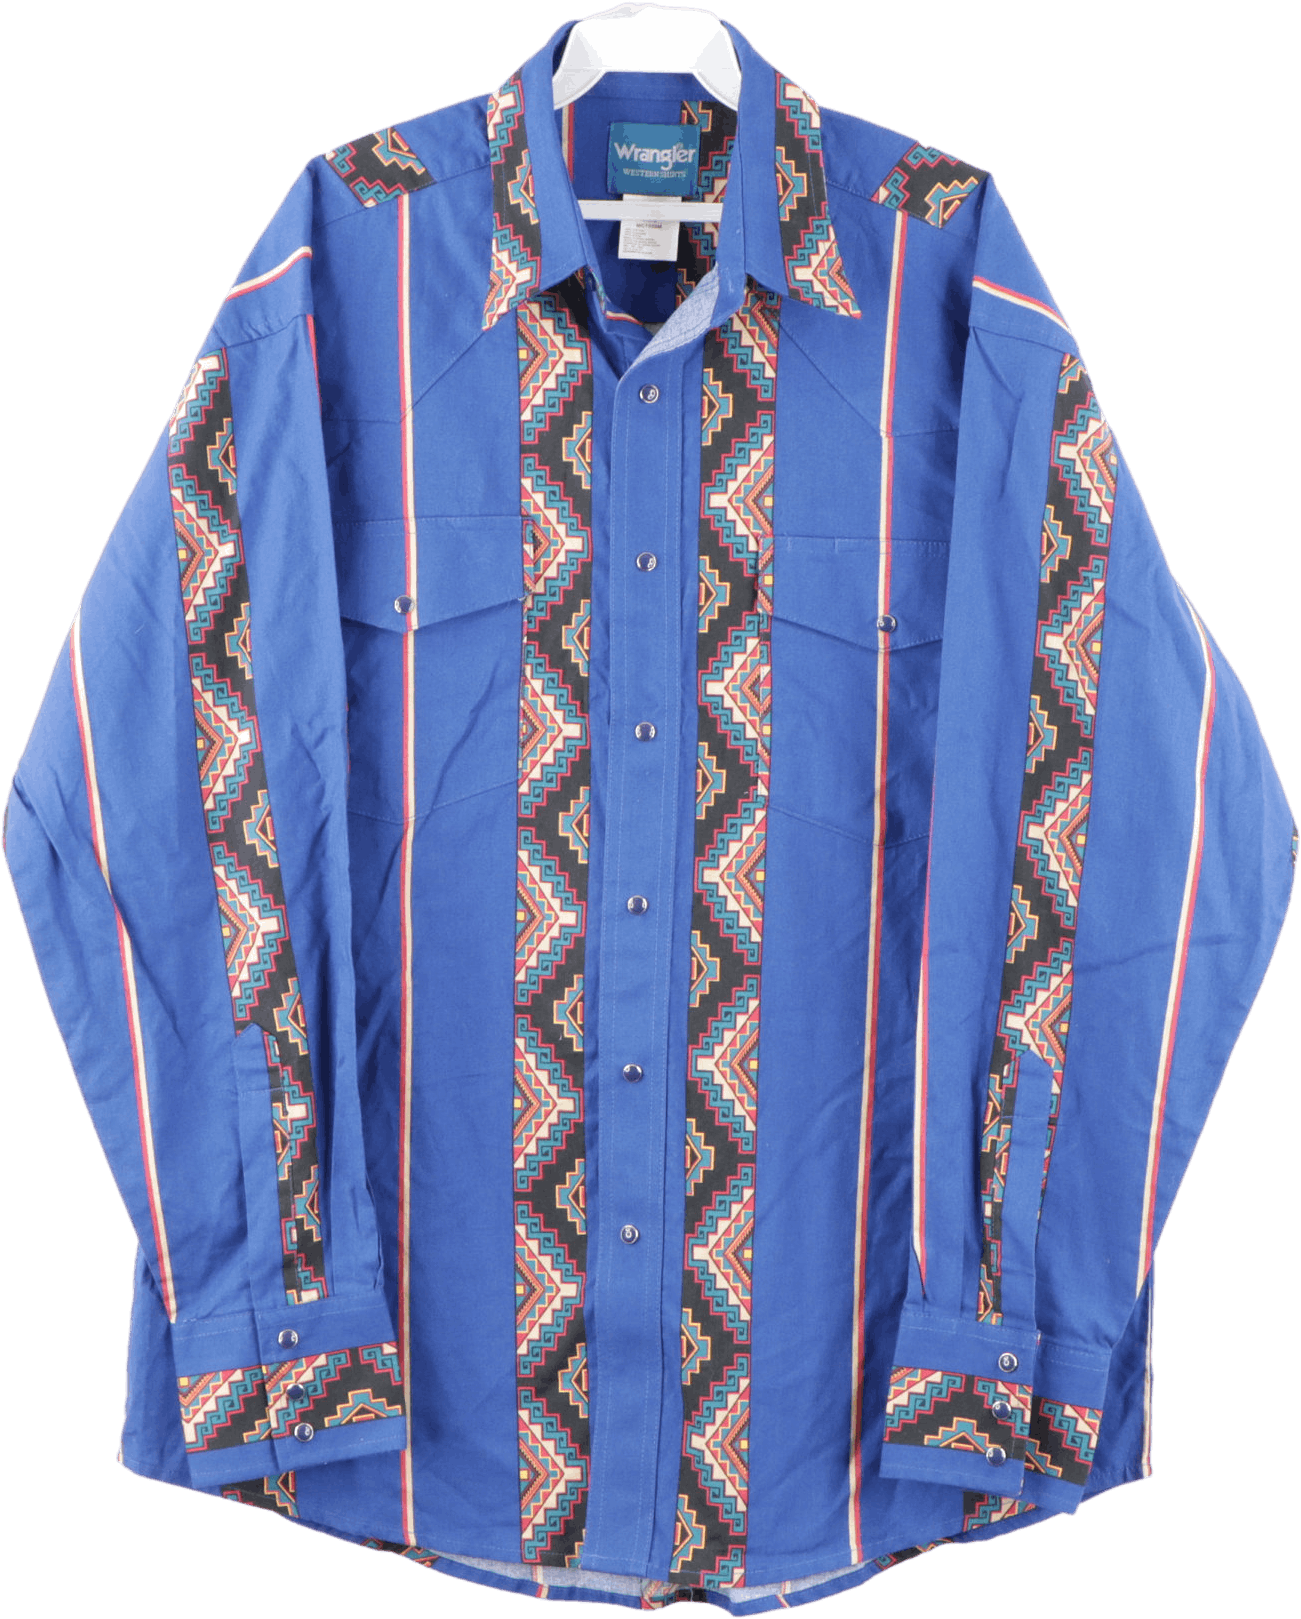 Vintage 90's Men's Southwestern Pearl Snap Button Up Shirt by Wrangler |  Shop THRILLING